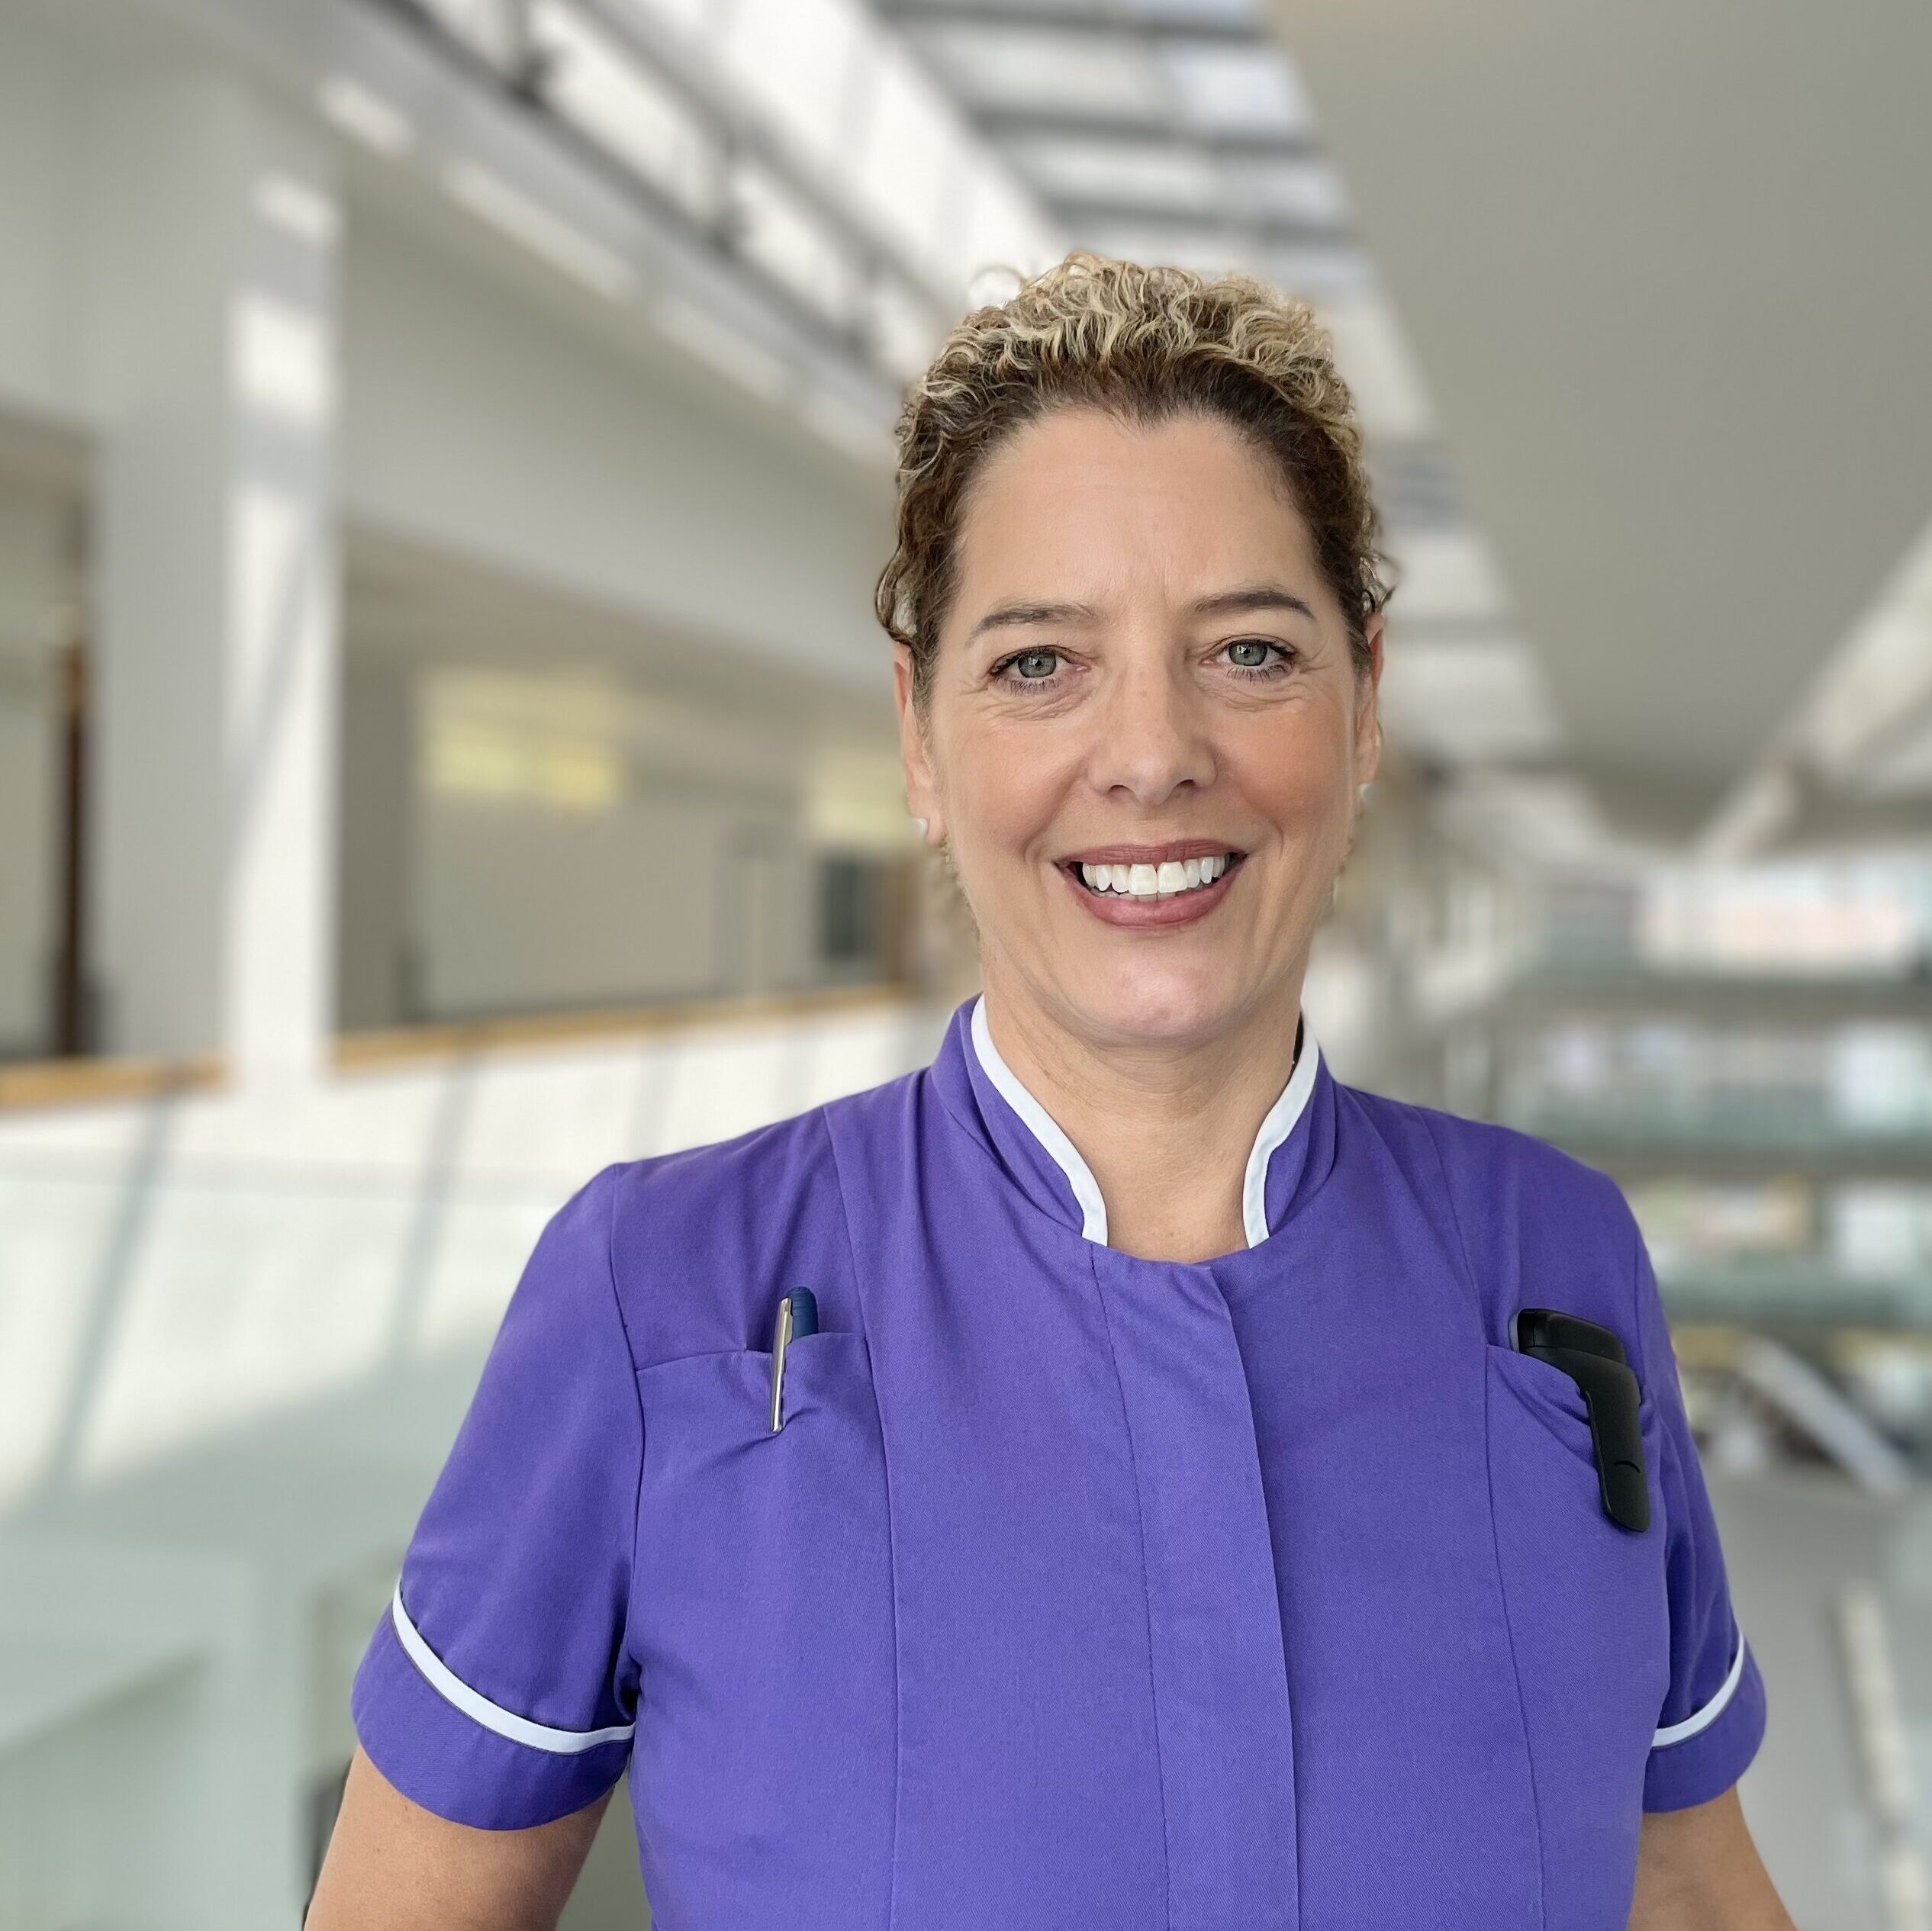 Heather Williams is a Nurse Consultant within the Chronic Pain and Neuromodulation team at Newcastle Hospitals